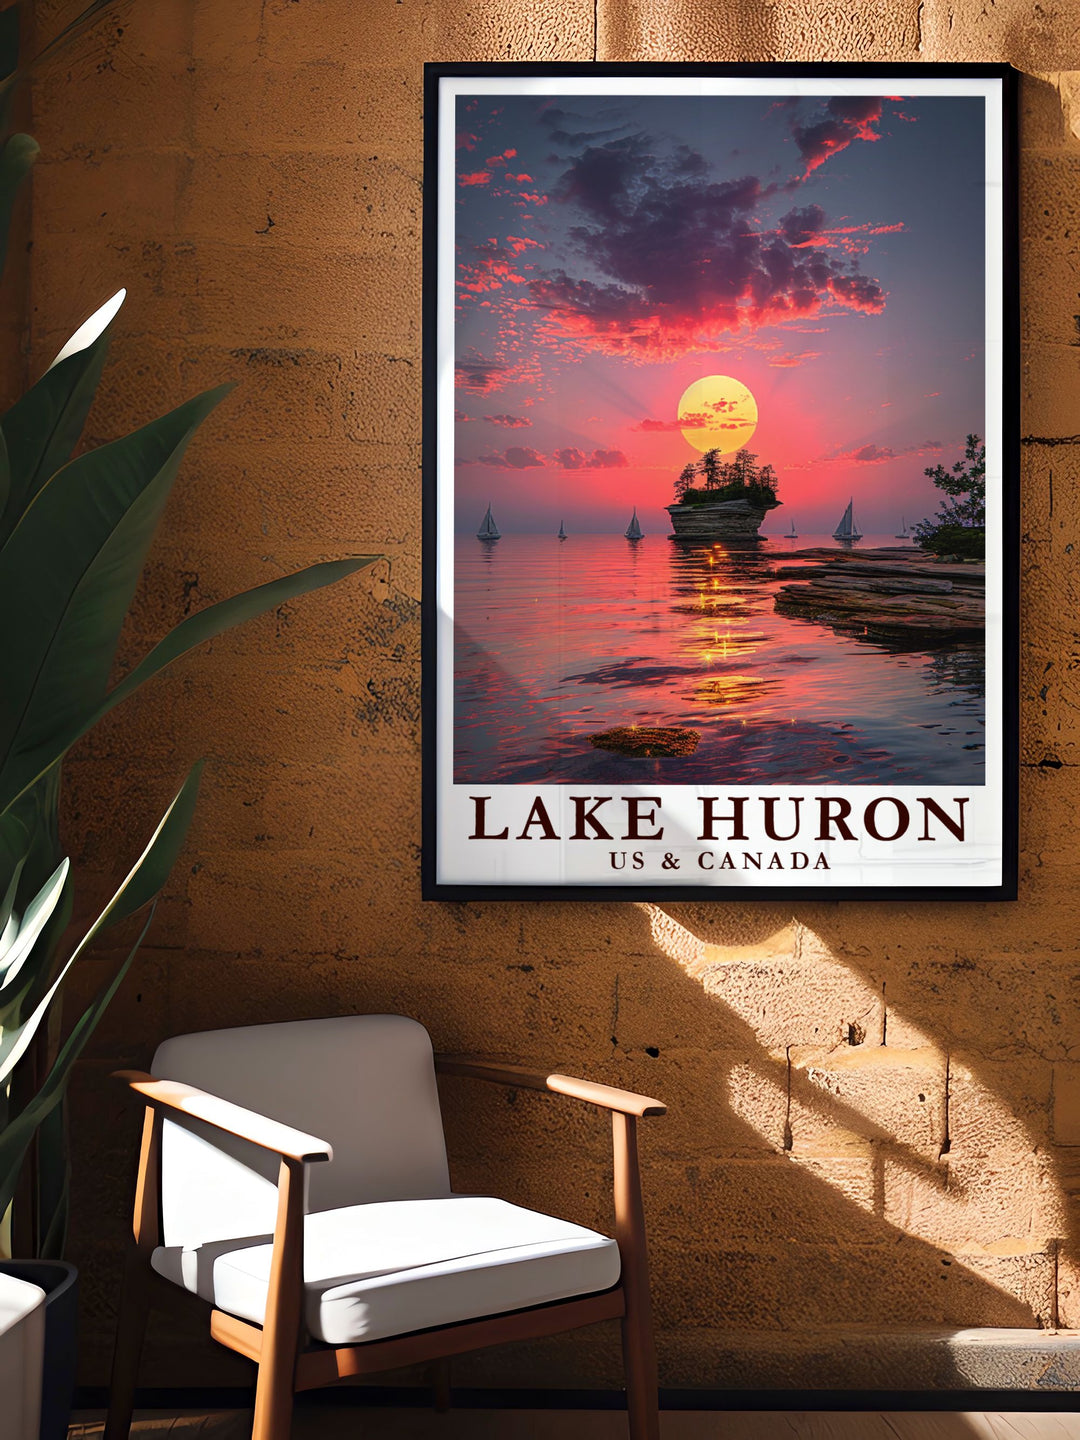 Celebrate the beauty of nature with this Lake Huron artwork. The digital download offers a versatile option for personalized gifts and home decor capturing the serene and captivating landscapes of Lake Huron in a unique and beautiful way